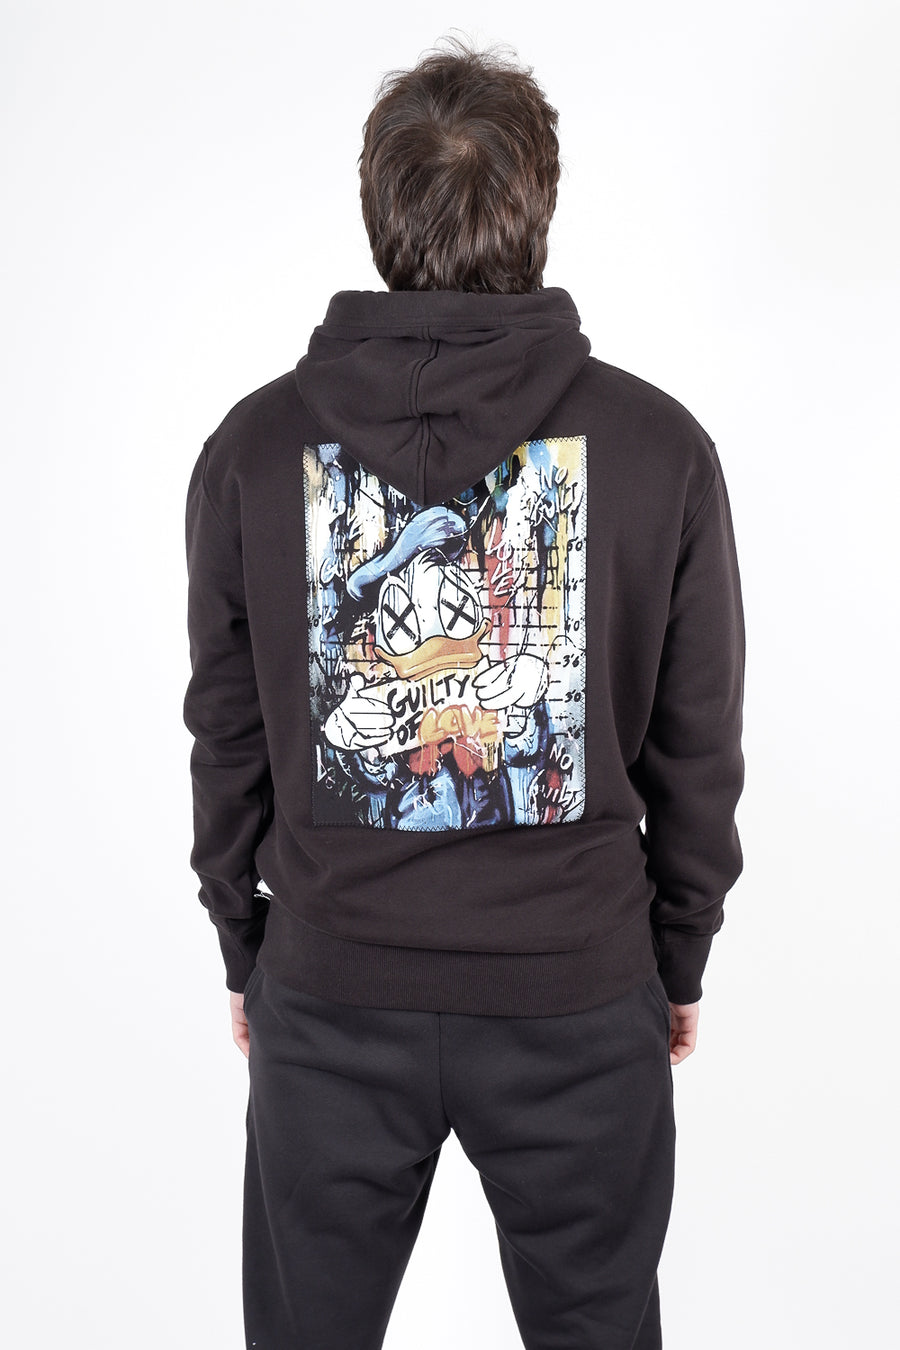 Buy the ABE Donald Hoodie Black at Intro. Spend £50 for free UK delivery. Official stockists. We ship worldwide.